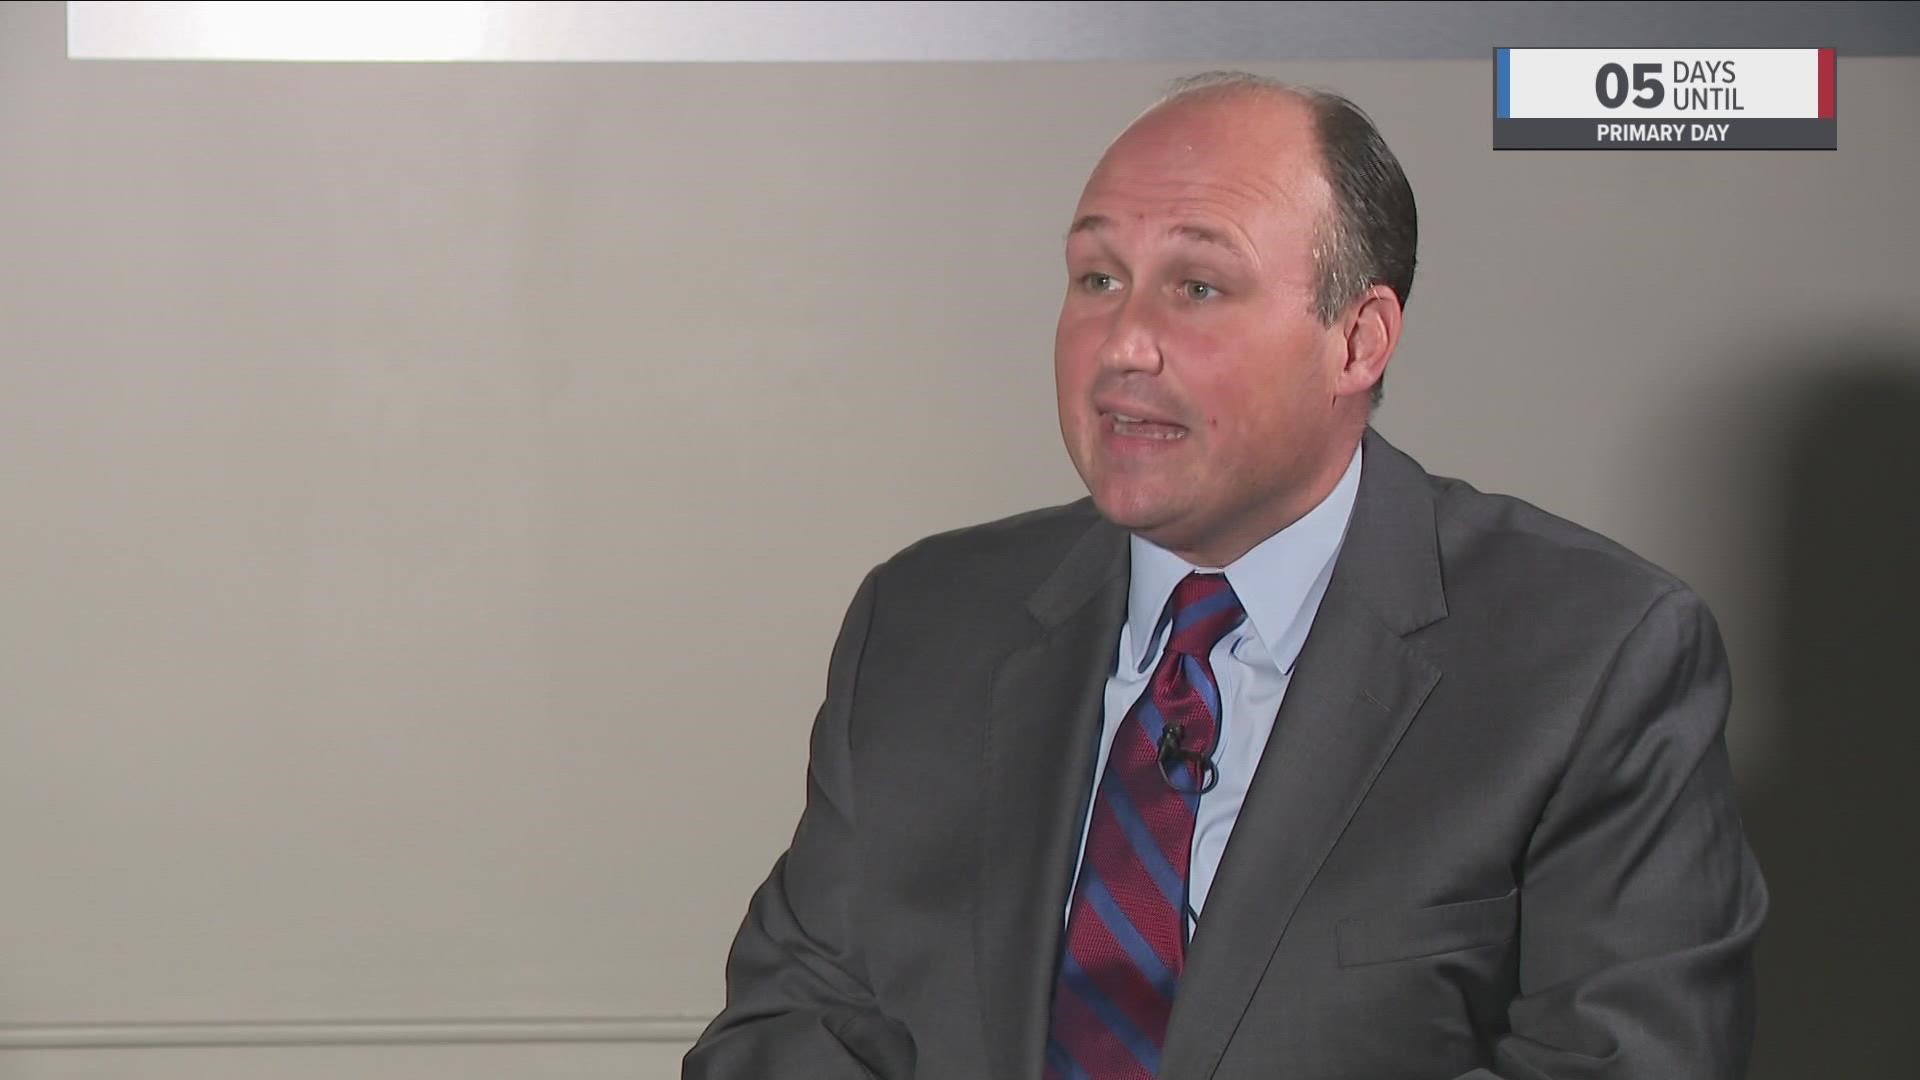 Langworthy is a first-time candidate for public office.